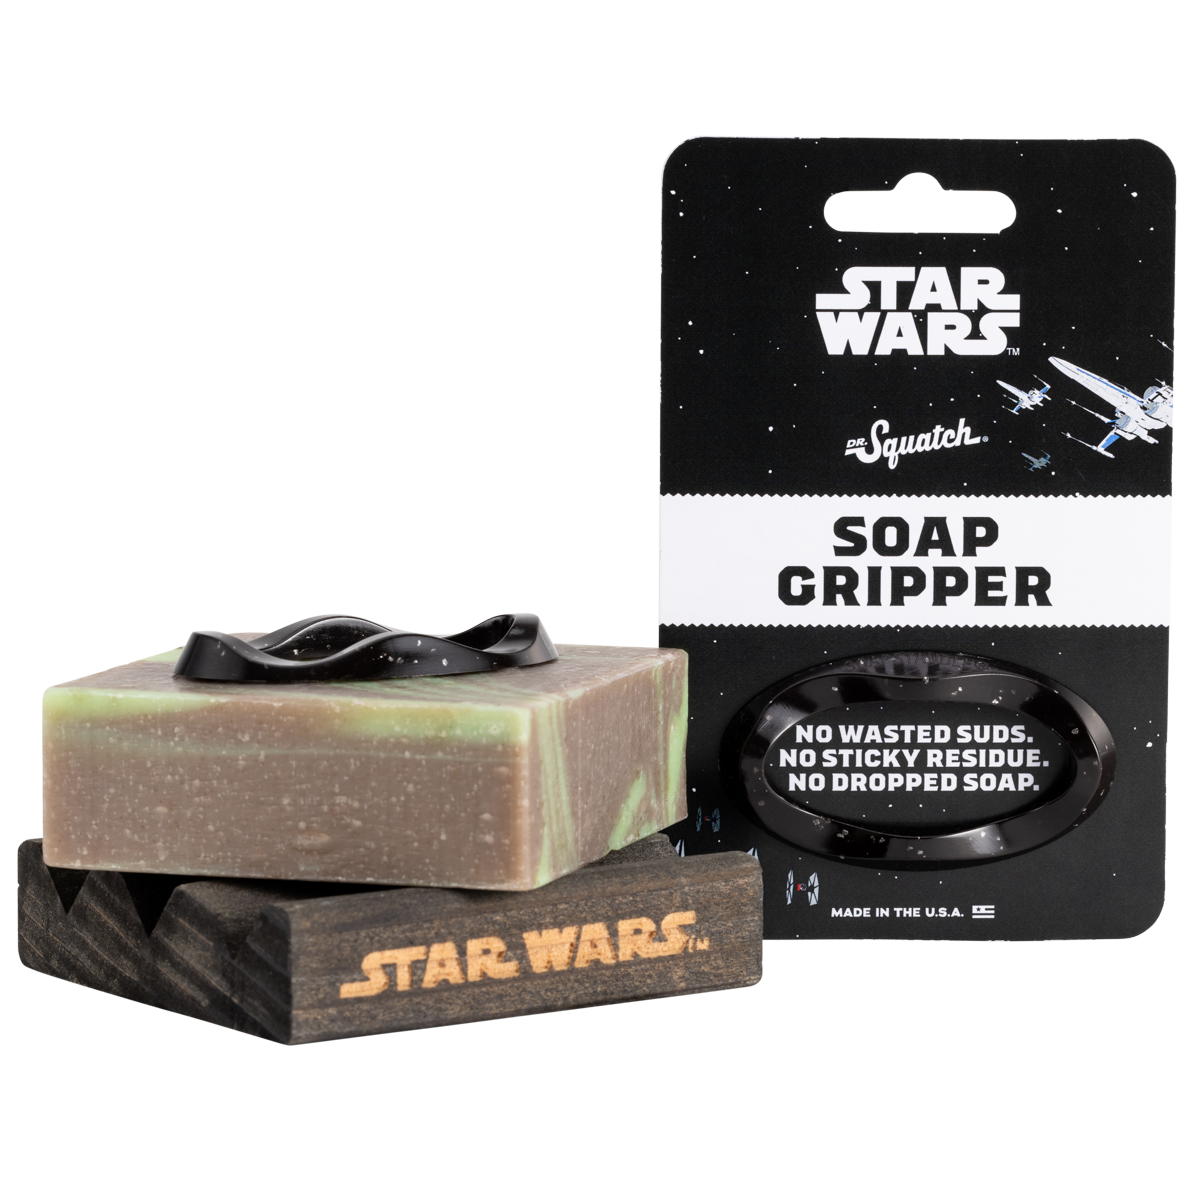 The Star Wars™ Booster Pack